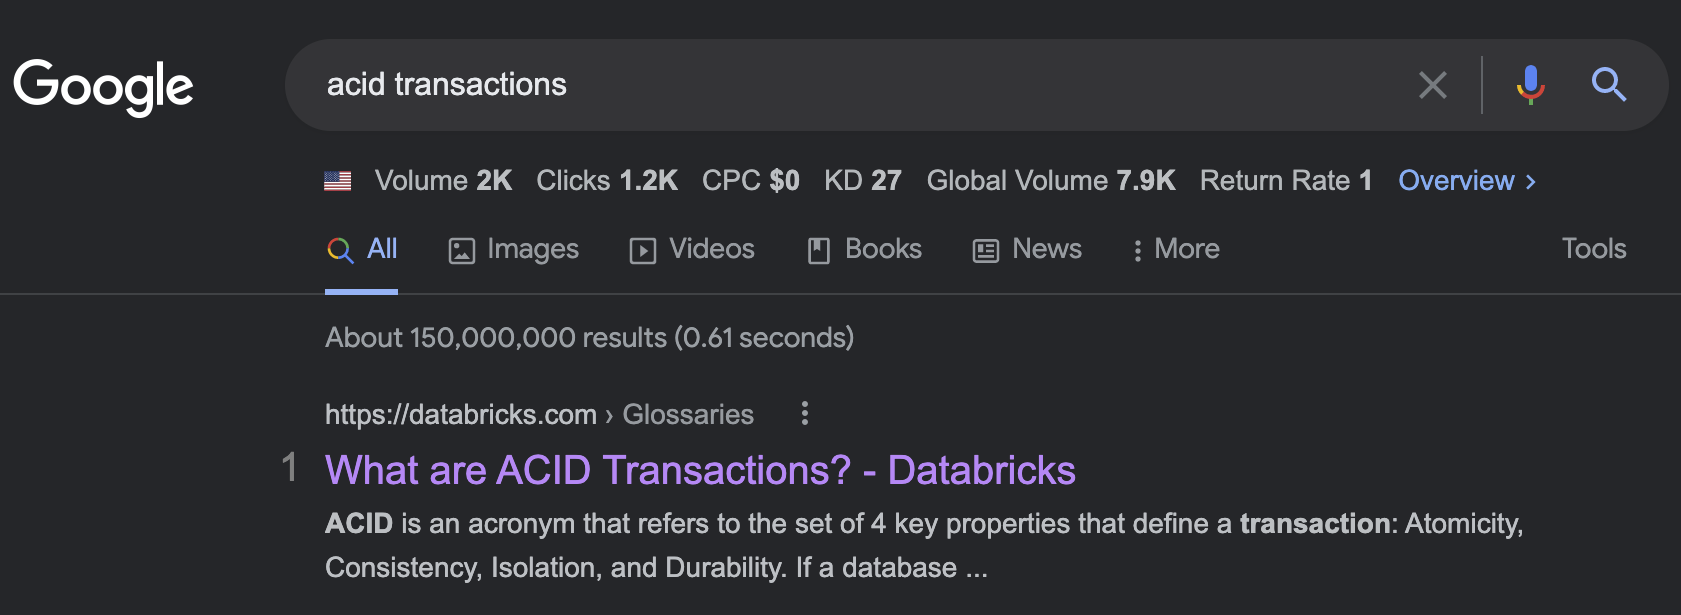 search engine results page for 'acid transactions'